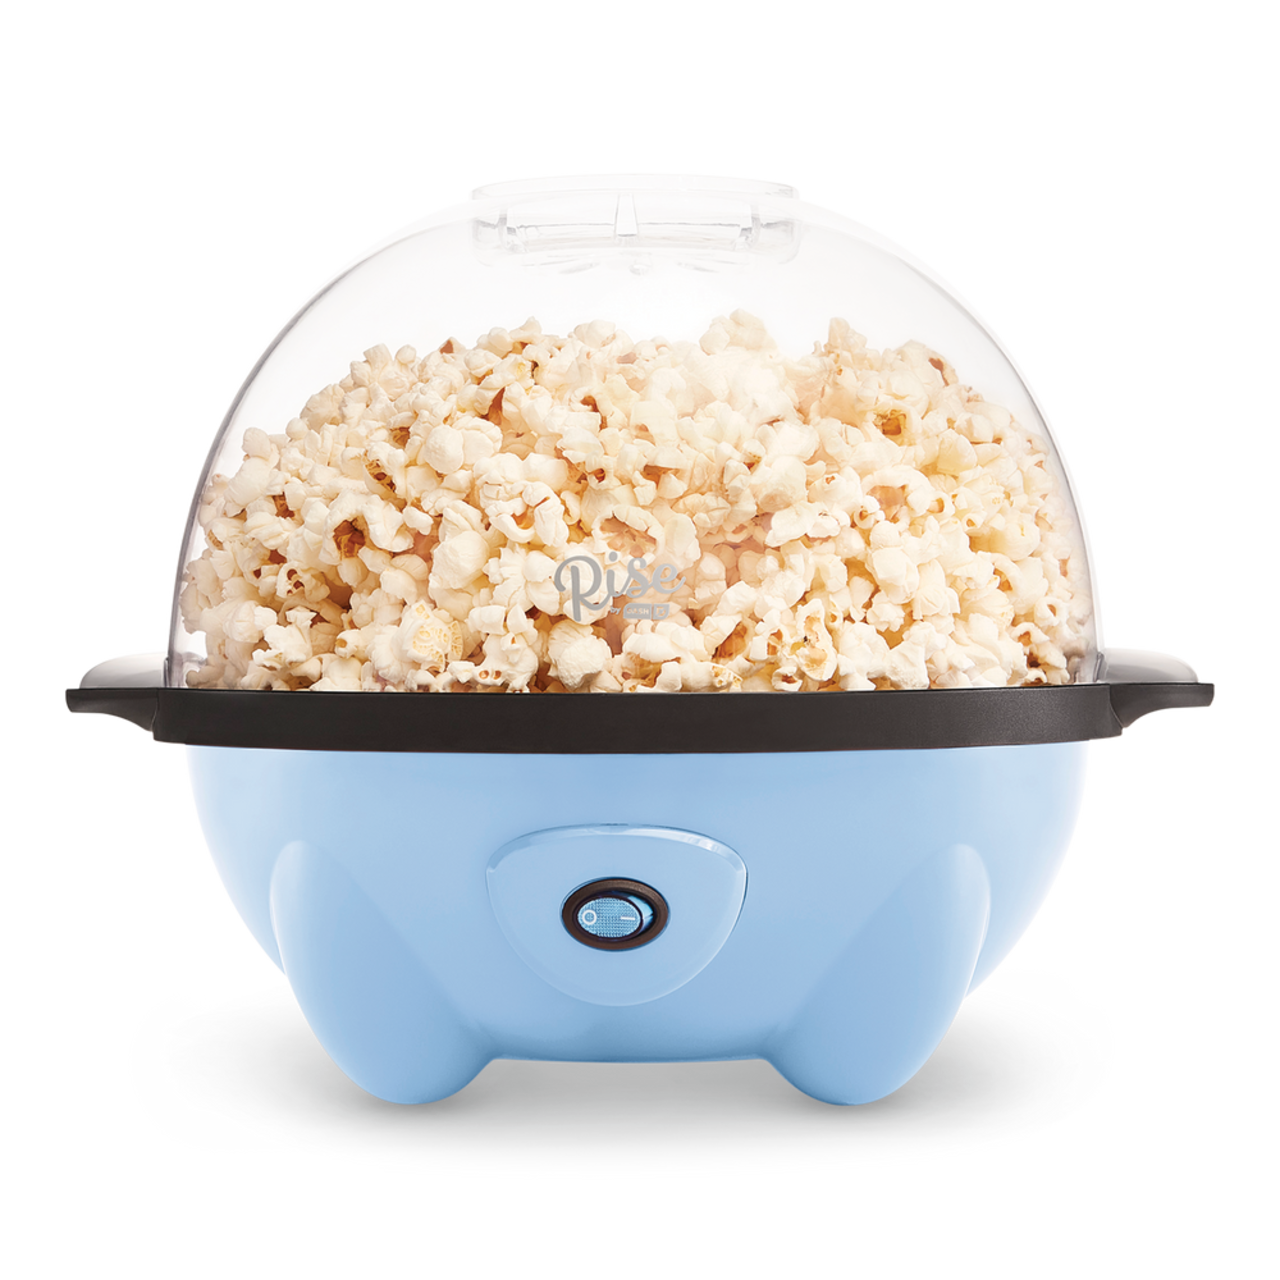 DASH Hot Air Popcorn Popper Maker with Measuring Cup to Portion Popping  Corn